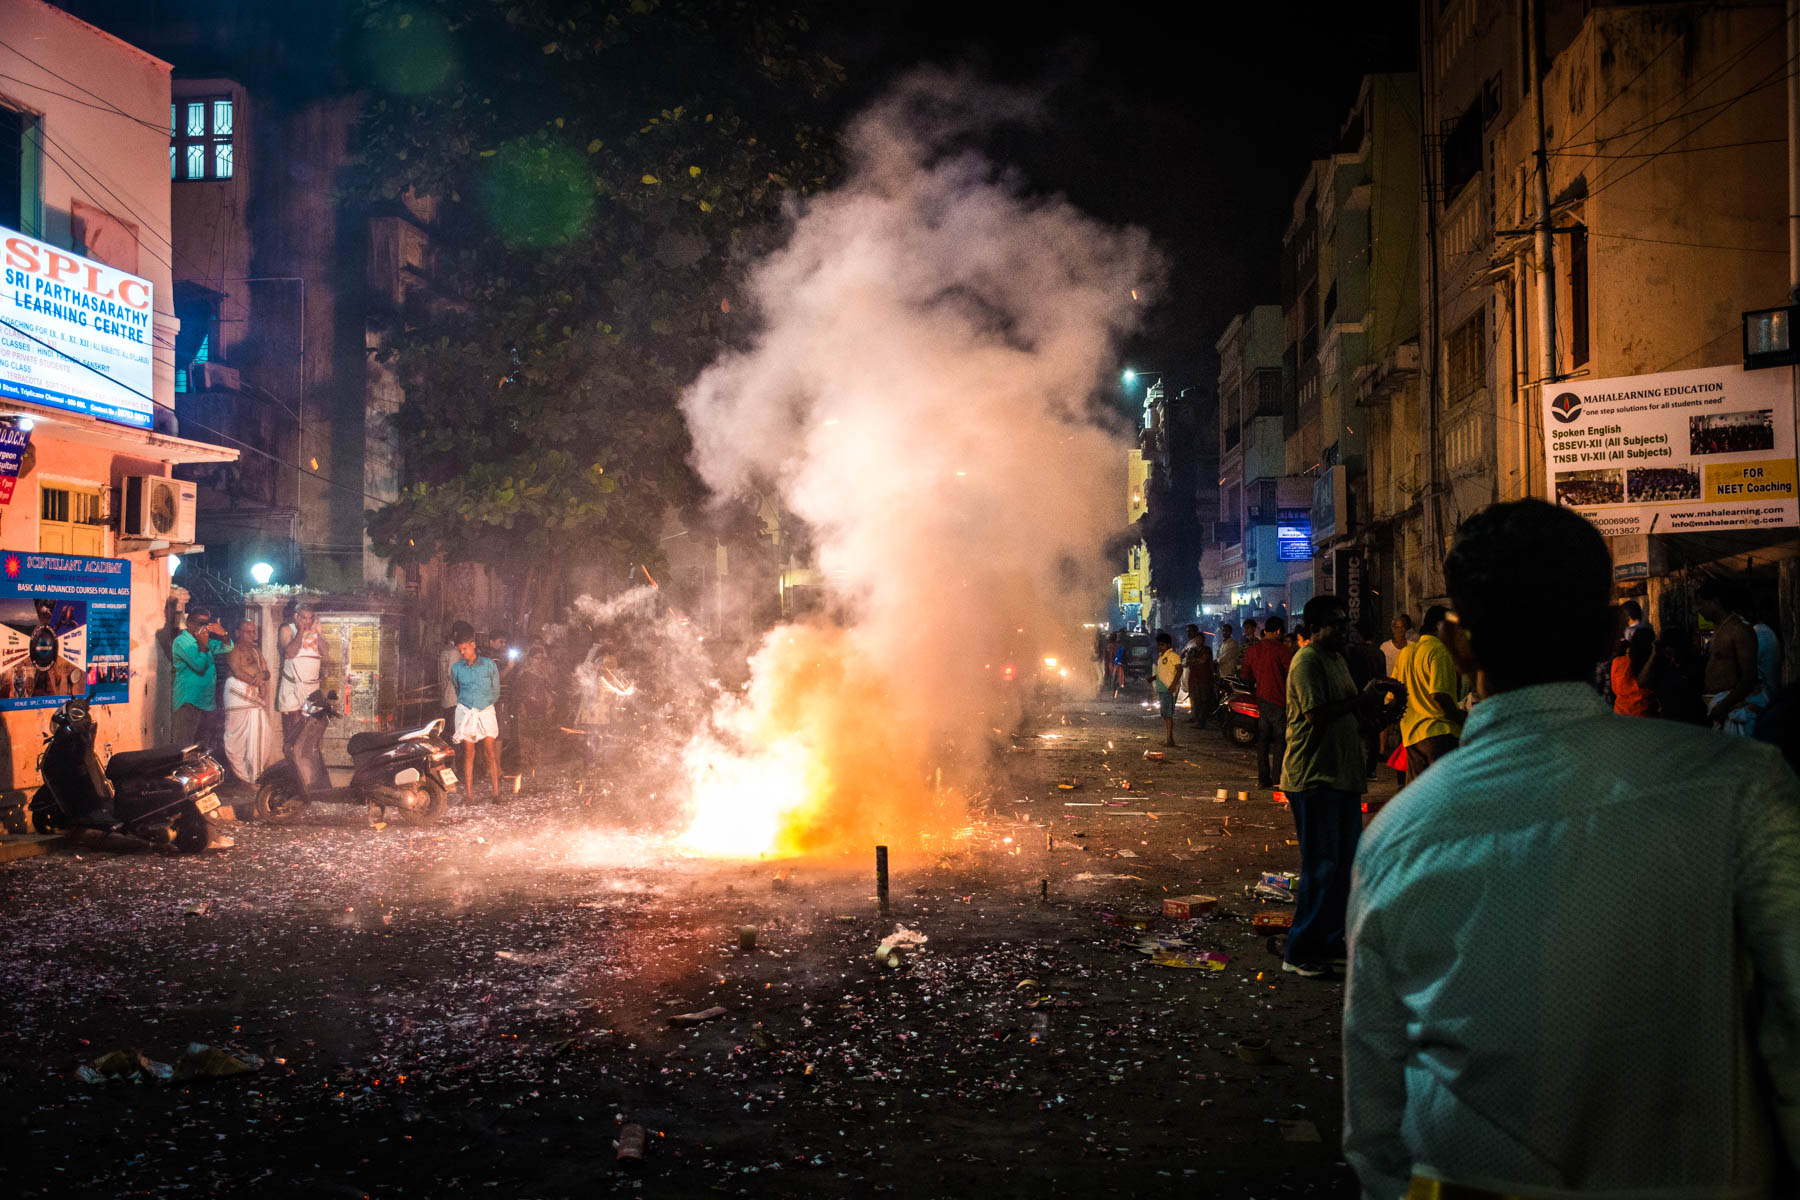 Explosions on the streets while celebrating Diwali in Chennai, India - Lost With Purpose